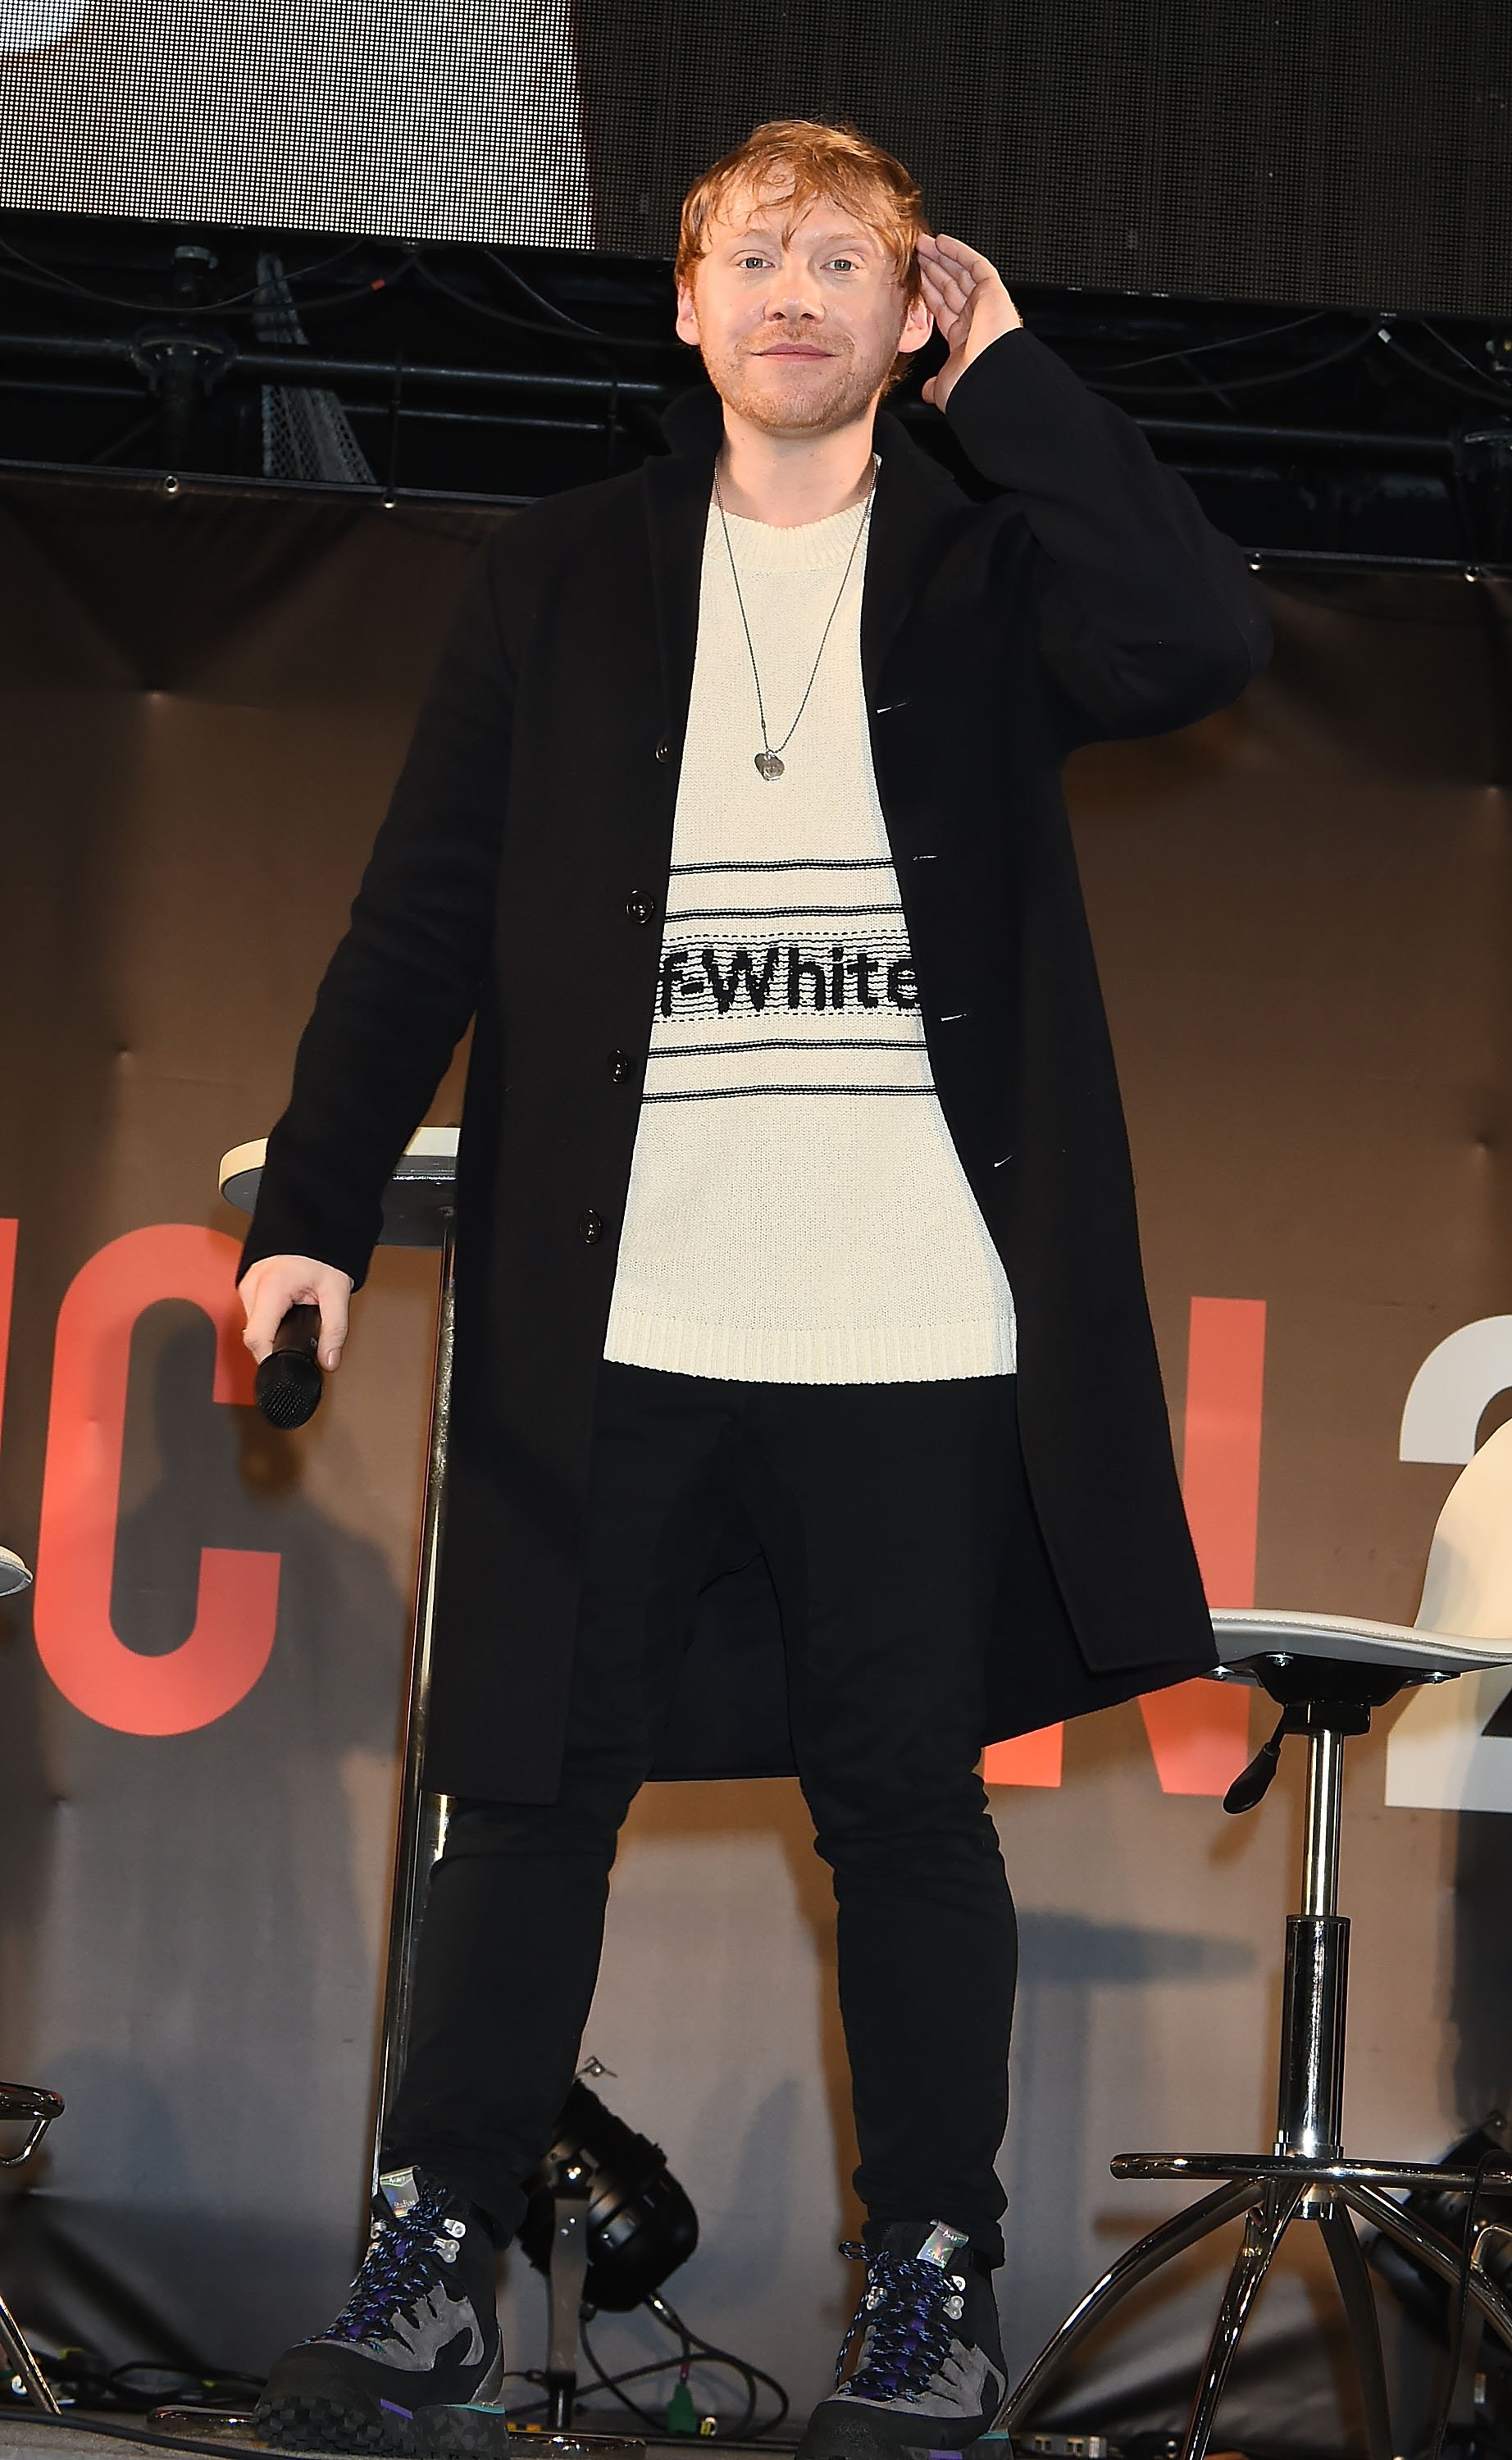 Rupert Grint attends a talk during the Tokyo Comic Con 2019 at Makuhari Messe on November 24, 2019 in Chiba, Japan. | Source: Getty Images